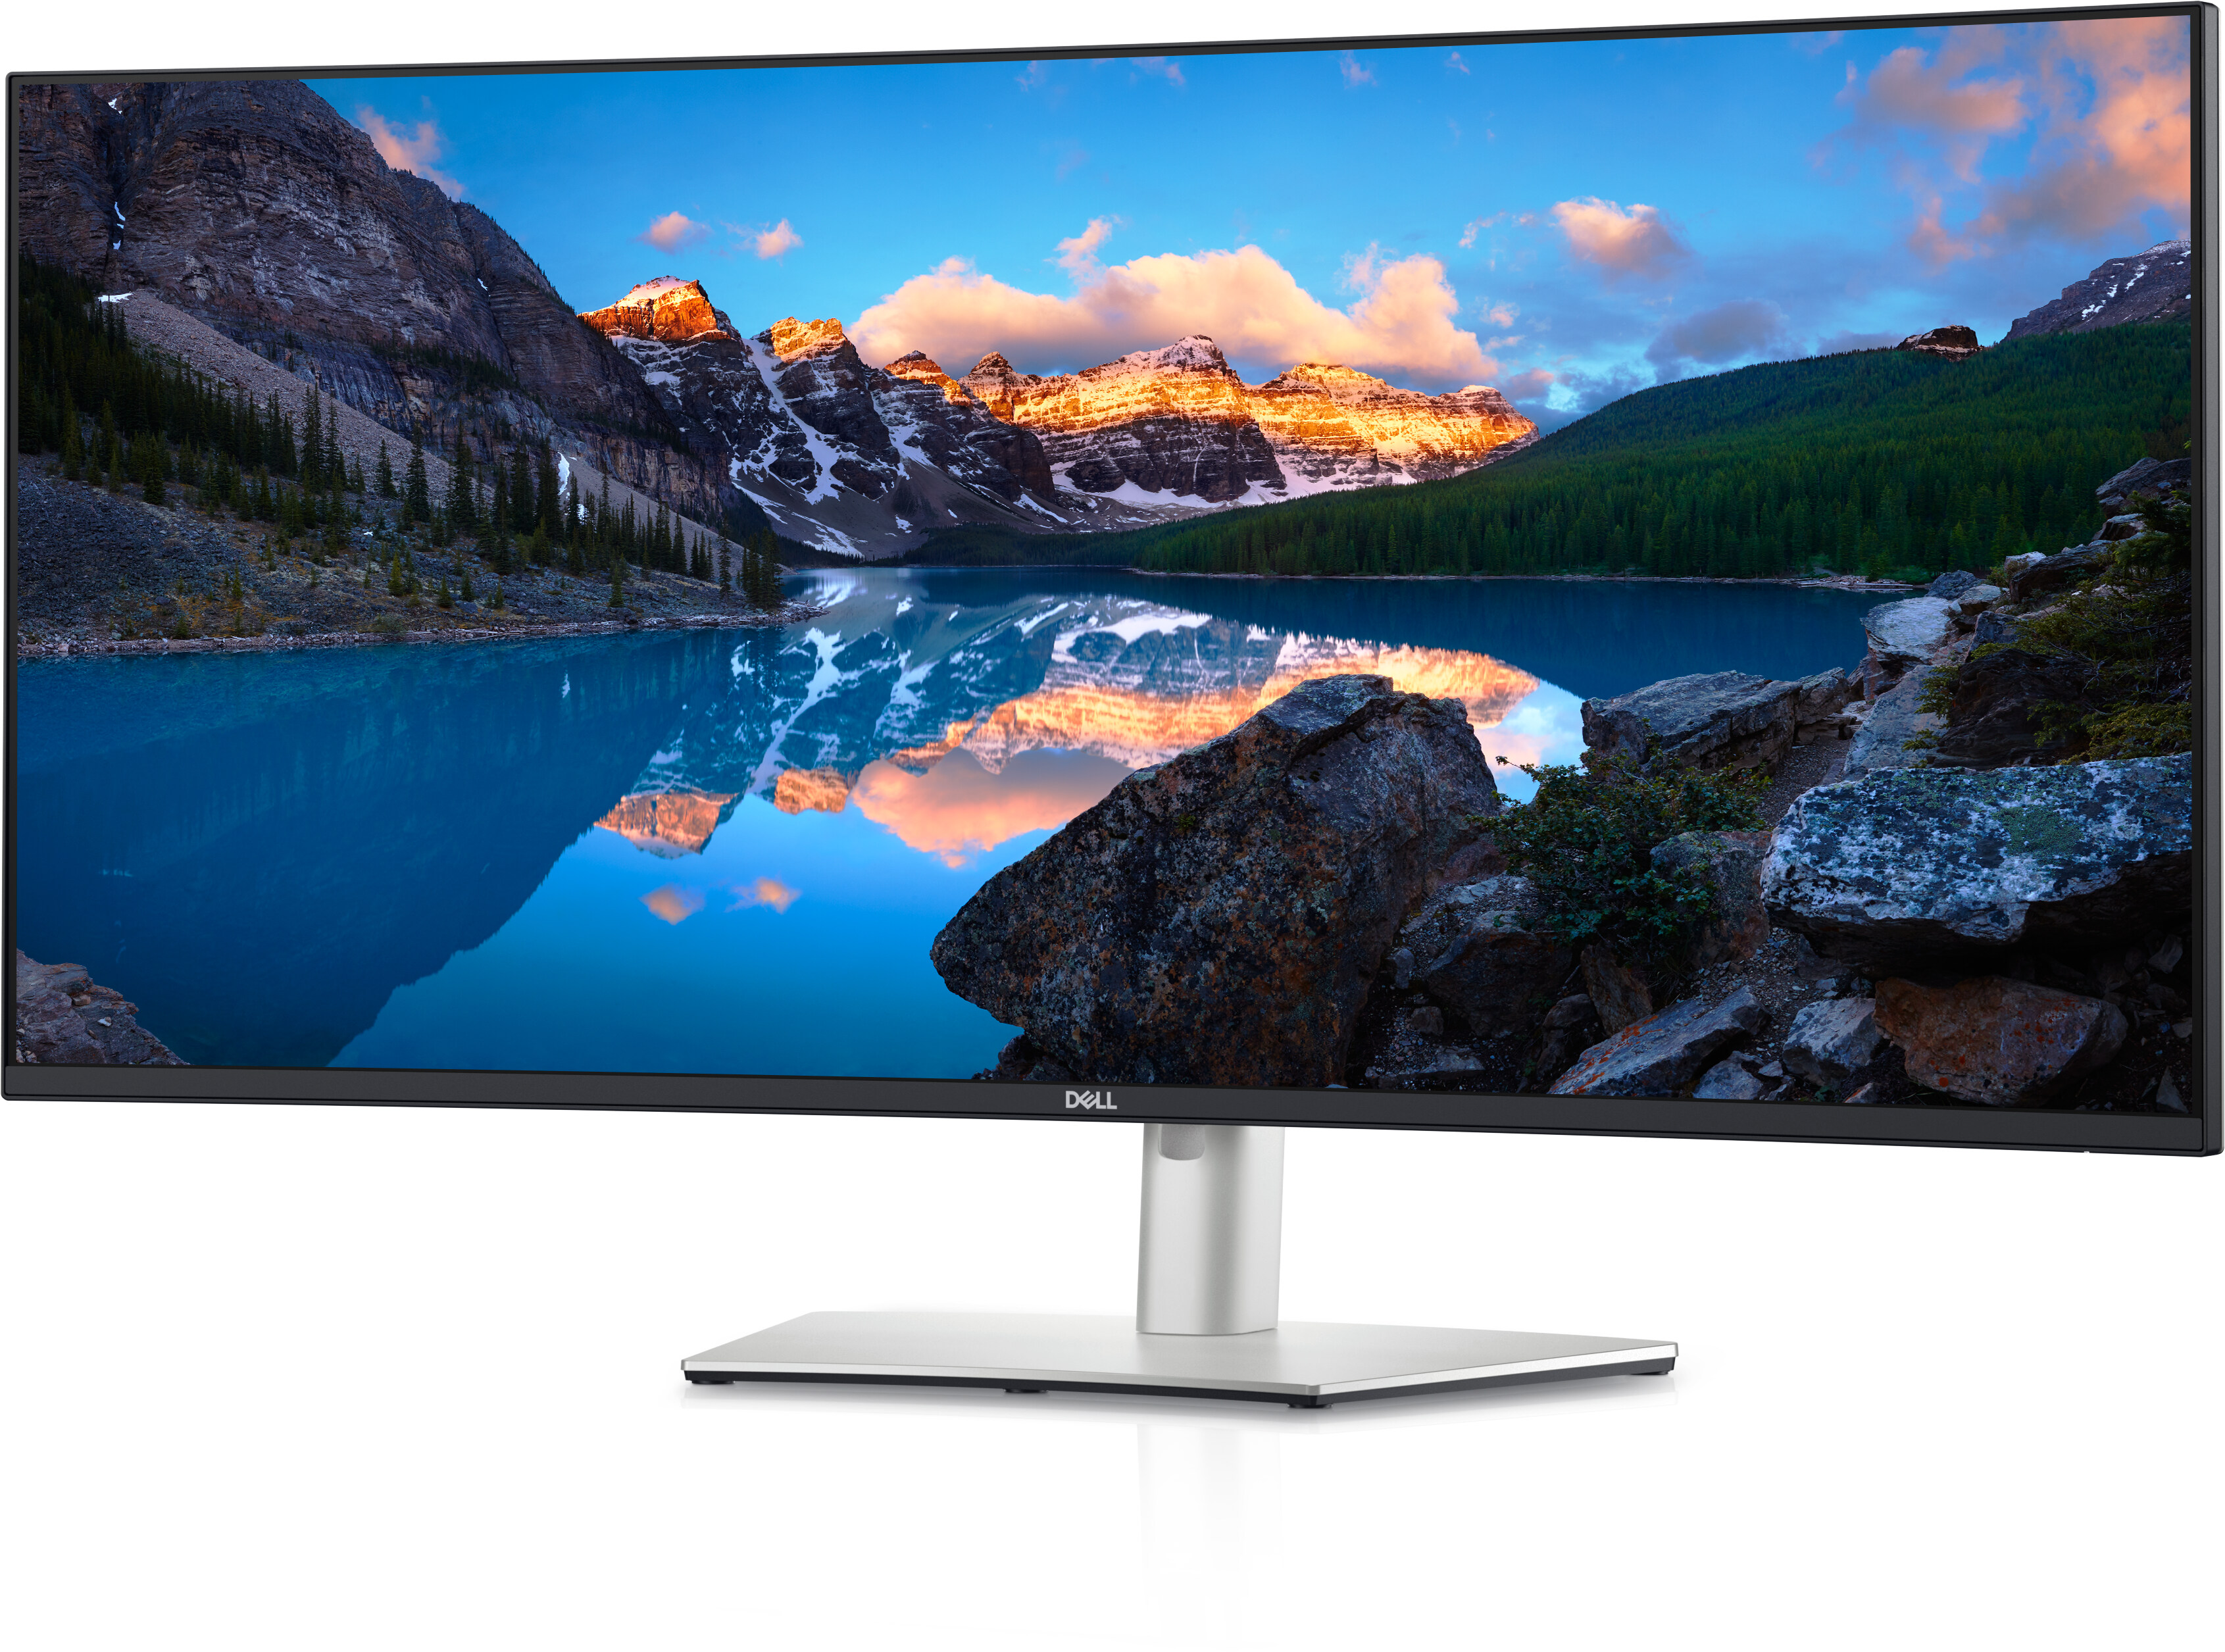 38 inch ultrawide, or 32 inch 4k. which would you go with? : r